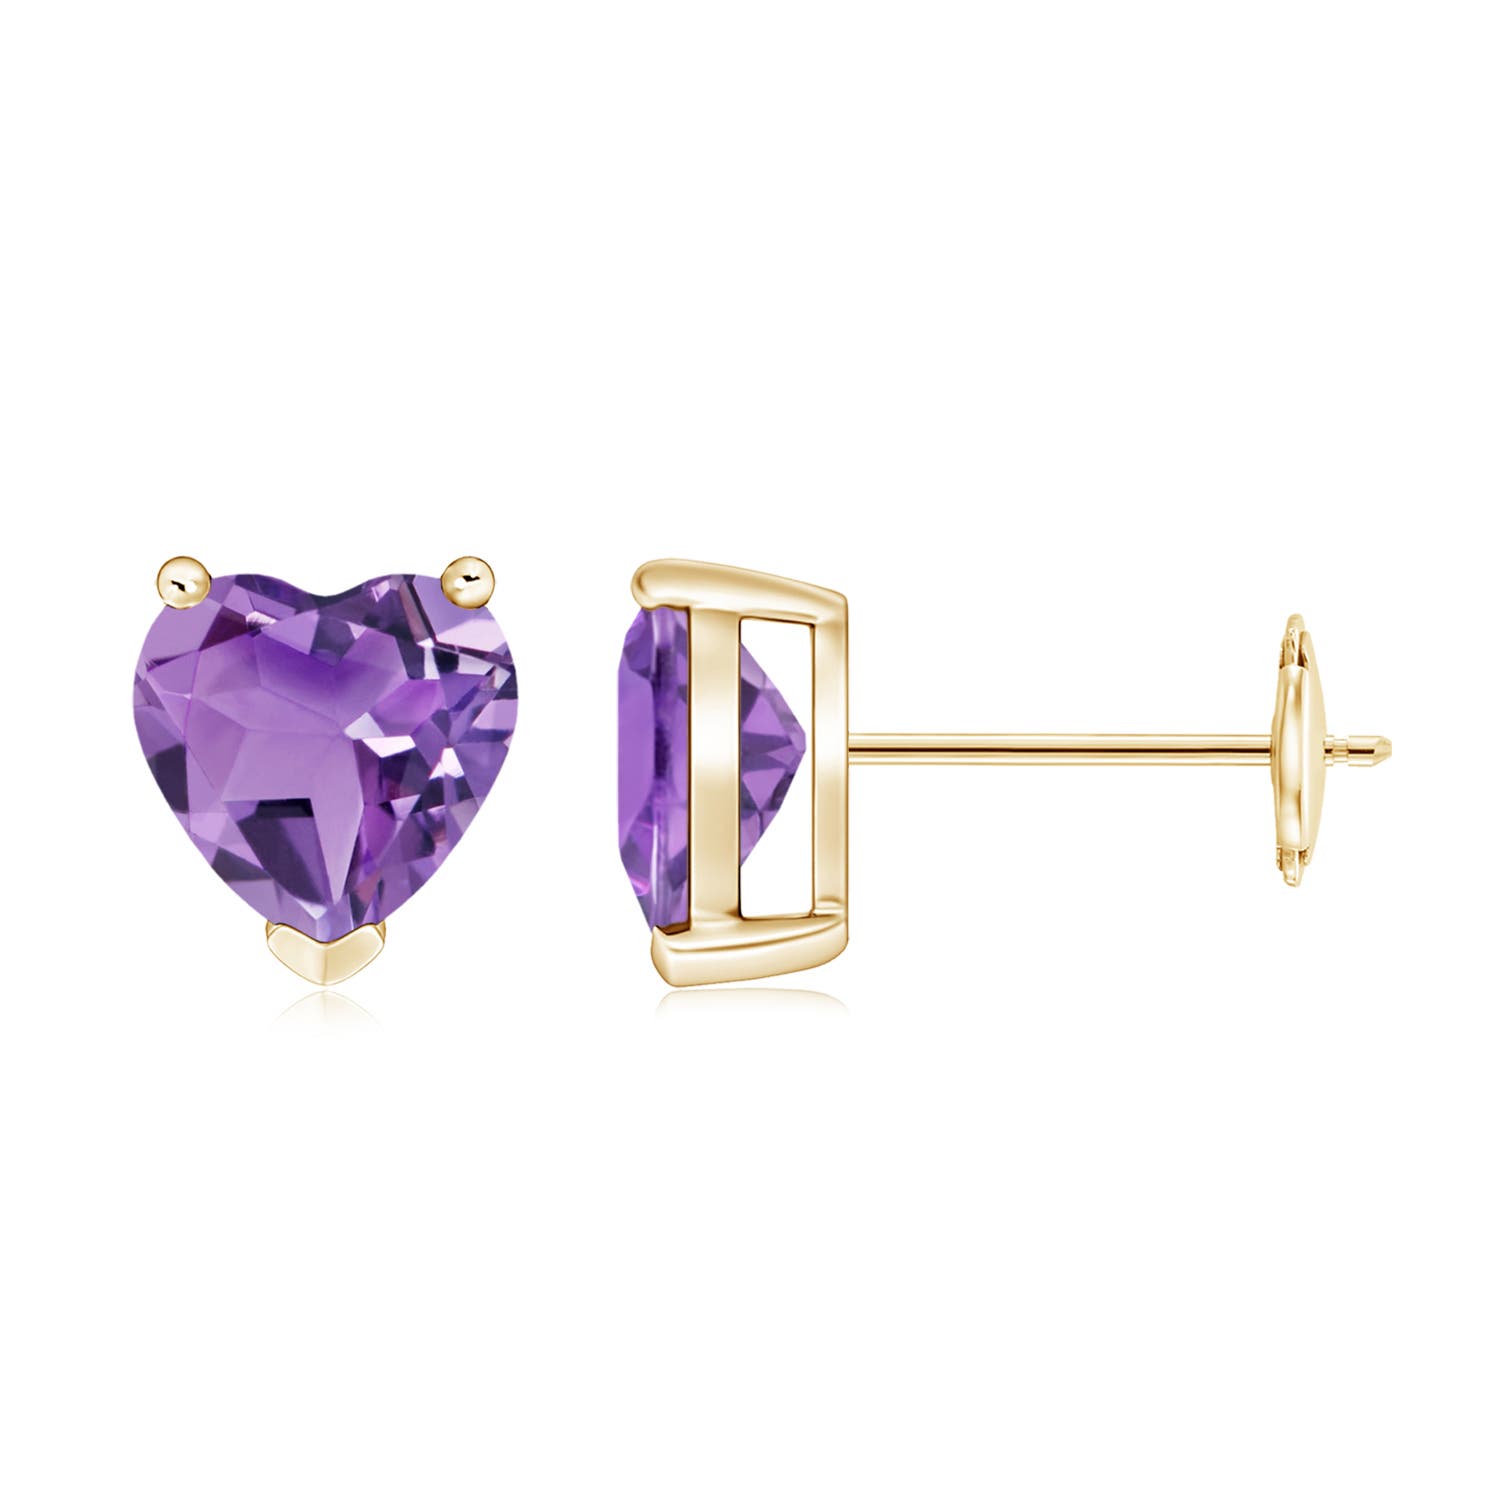 A - Amethyst / 2.2 CT / 14 KT Yellow Gold